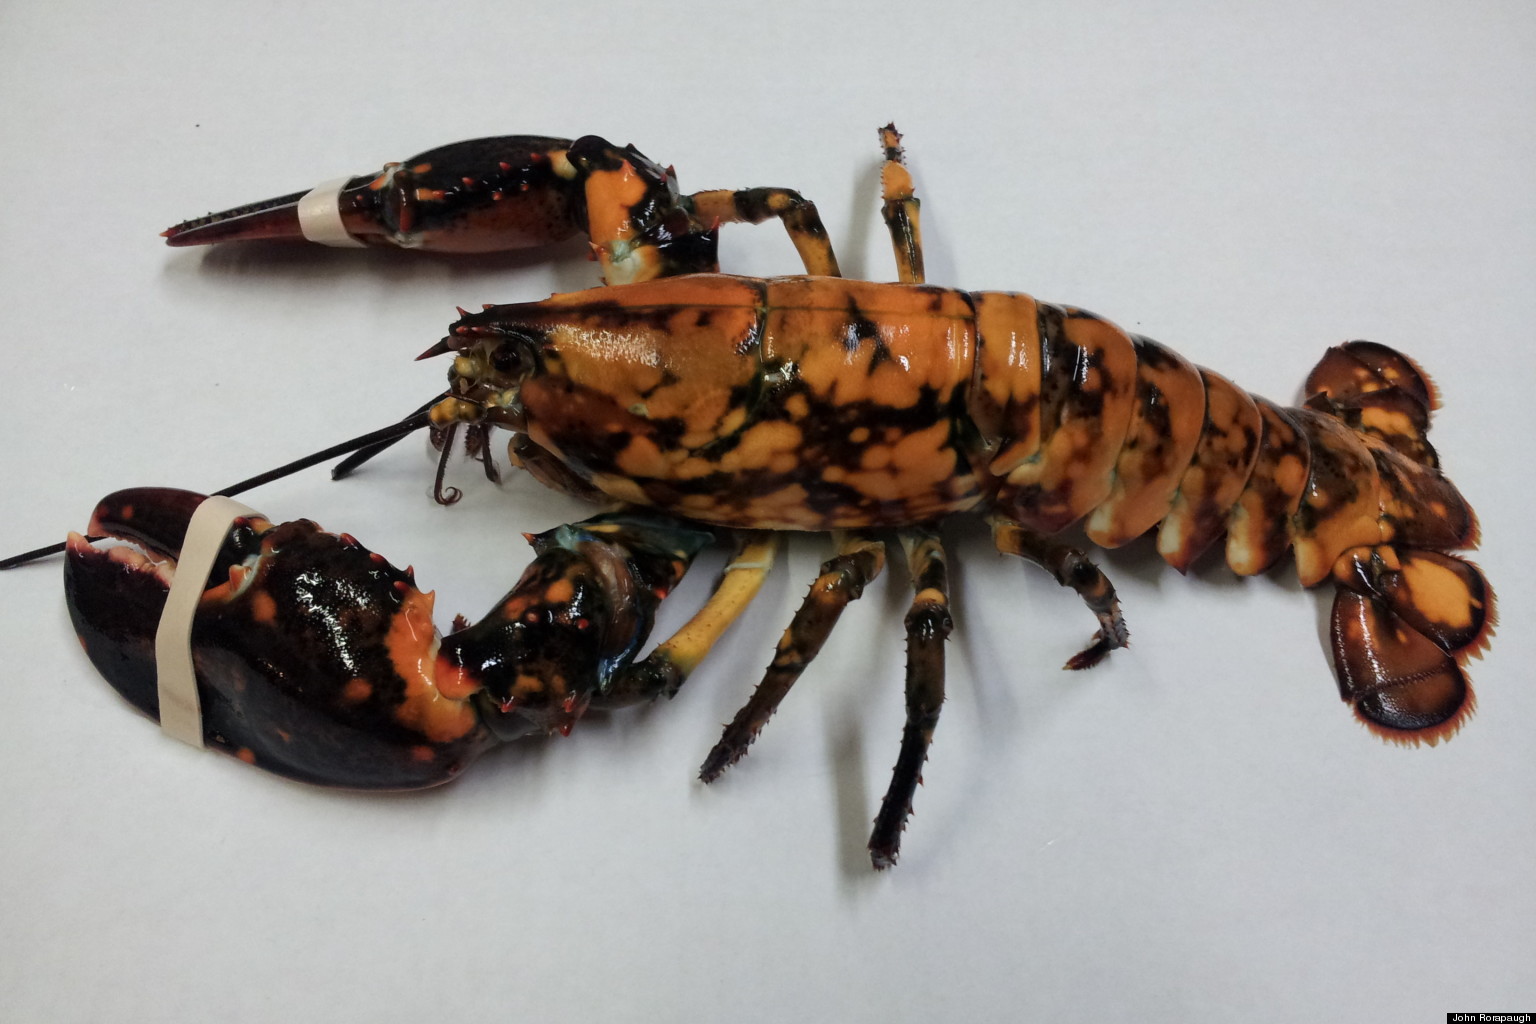 Eddie The Calico Lobster, Now At A D.C. Seafood Wholesaler's Offices ...